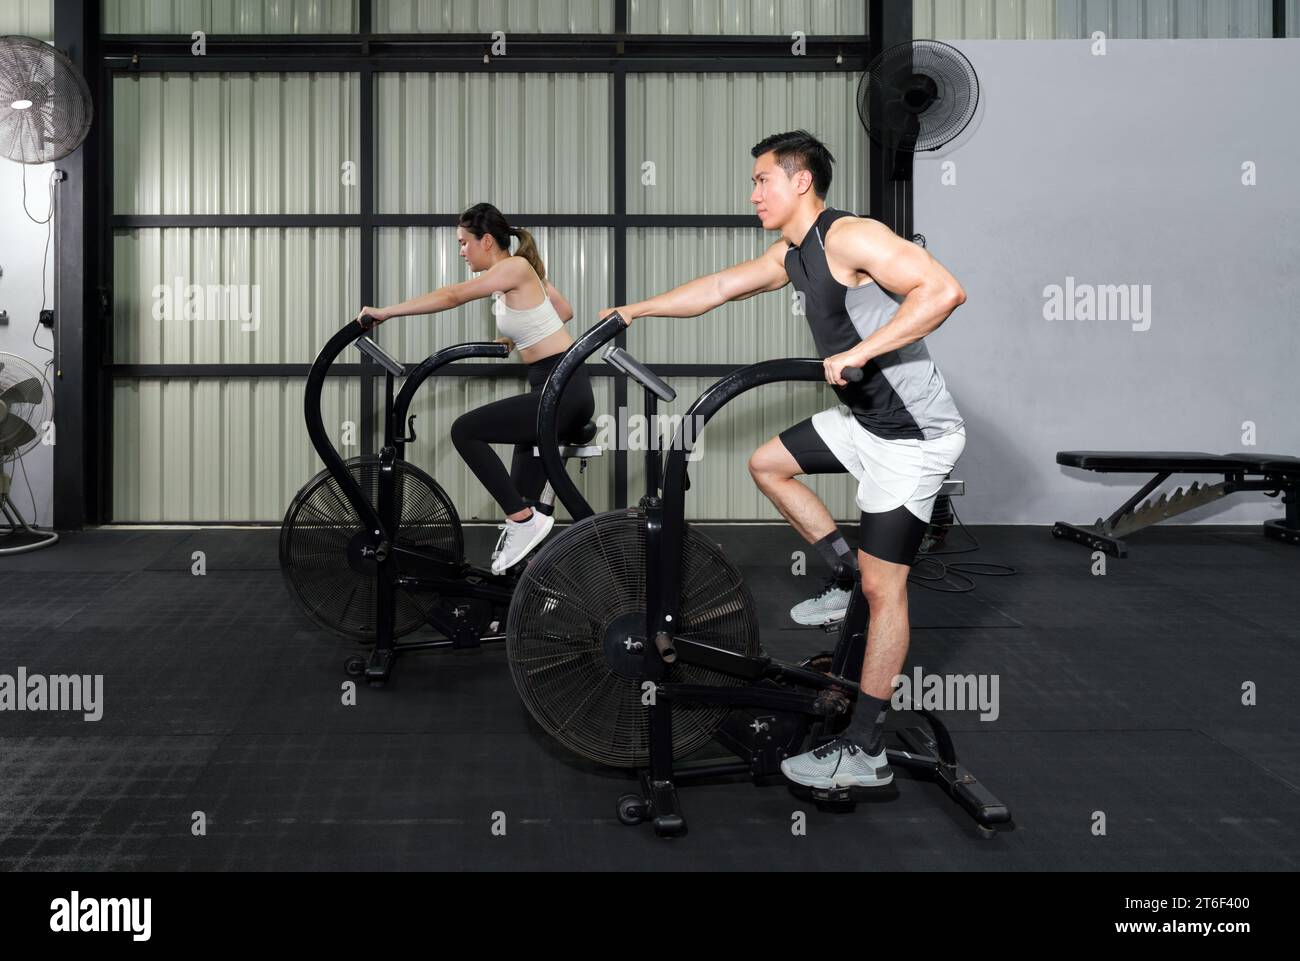 Fitness Couple Cycling on Stationary Bikes in Health Club Stock Photo